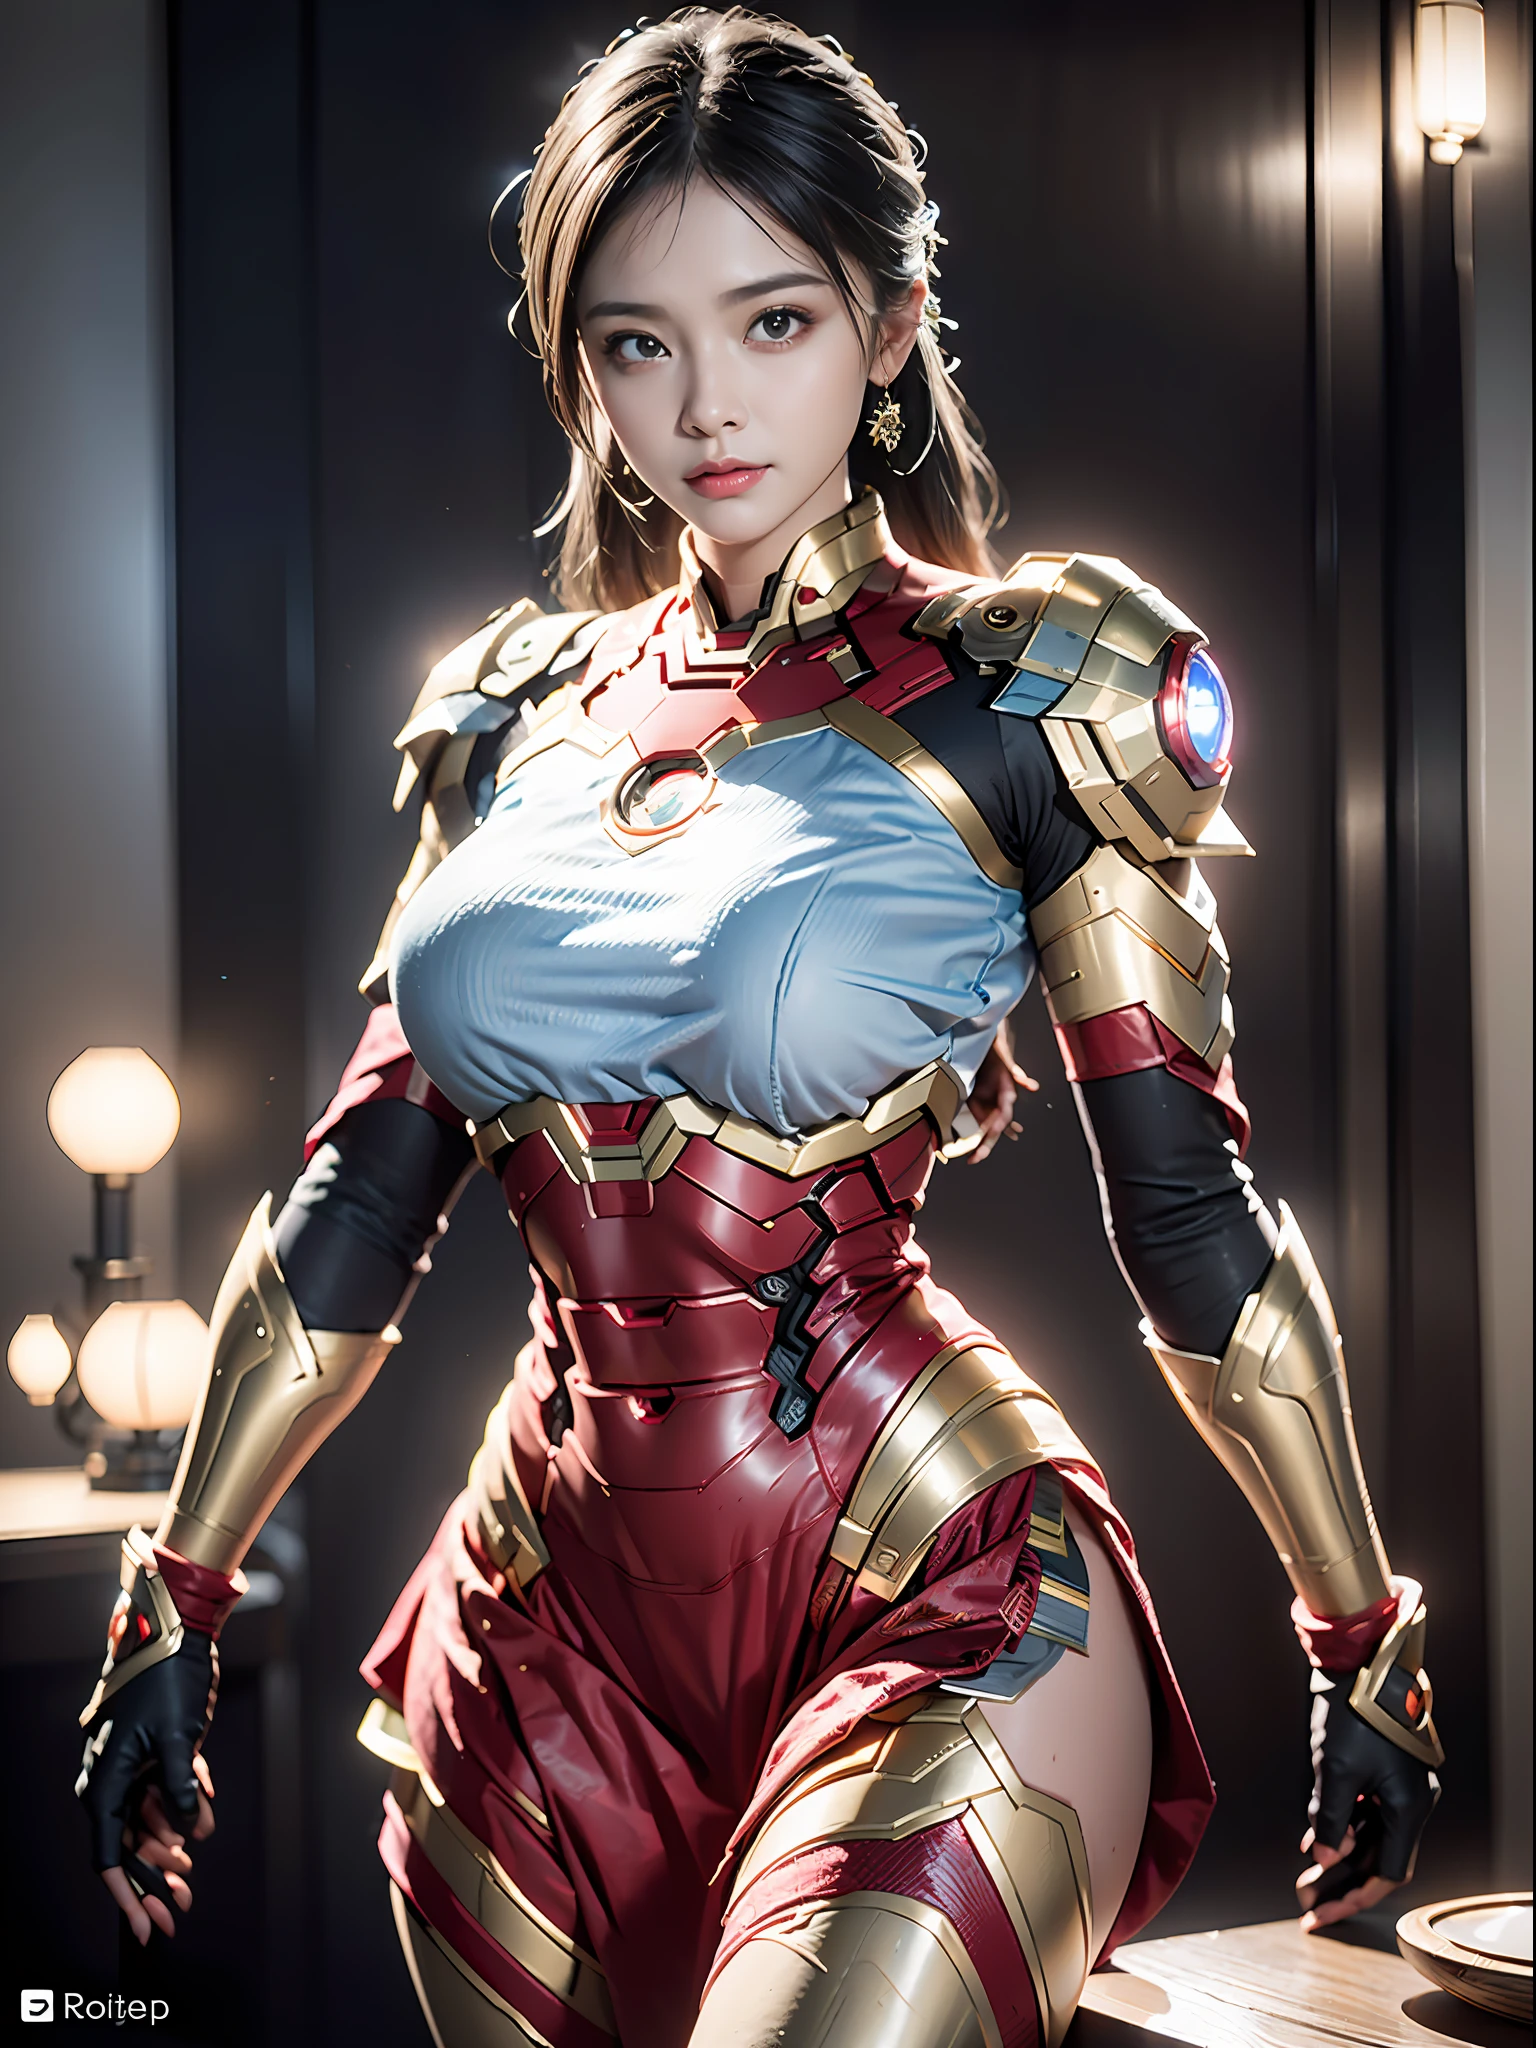 (Best Quality), ((Masterpiece), (Detail: 1.4), 3D, A Beautiful Iron Man Female Figure, HDR (High Dynamic Range), Ray Tracing, NVIDIA RTX, Super-Resolution, Unreal 5, Subsurface Scattering, PBR Textures, Post Processing, Anisotropic Filtering, Depth of Field, Maximum Sharpness and Sharpness, Multi-layer Textures, Albedo and Highlight Maps, Surface Shading, Accurate simulation of light-material interactions, perfect proportions, Octane Render, two-color light, large aperture, low ISO, white balance, rule of thirds, 8K RAW,